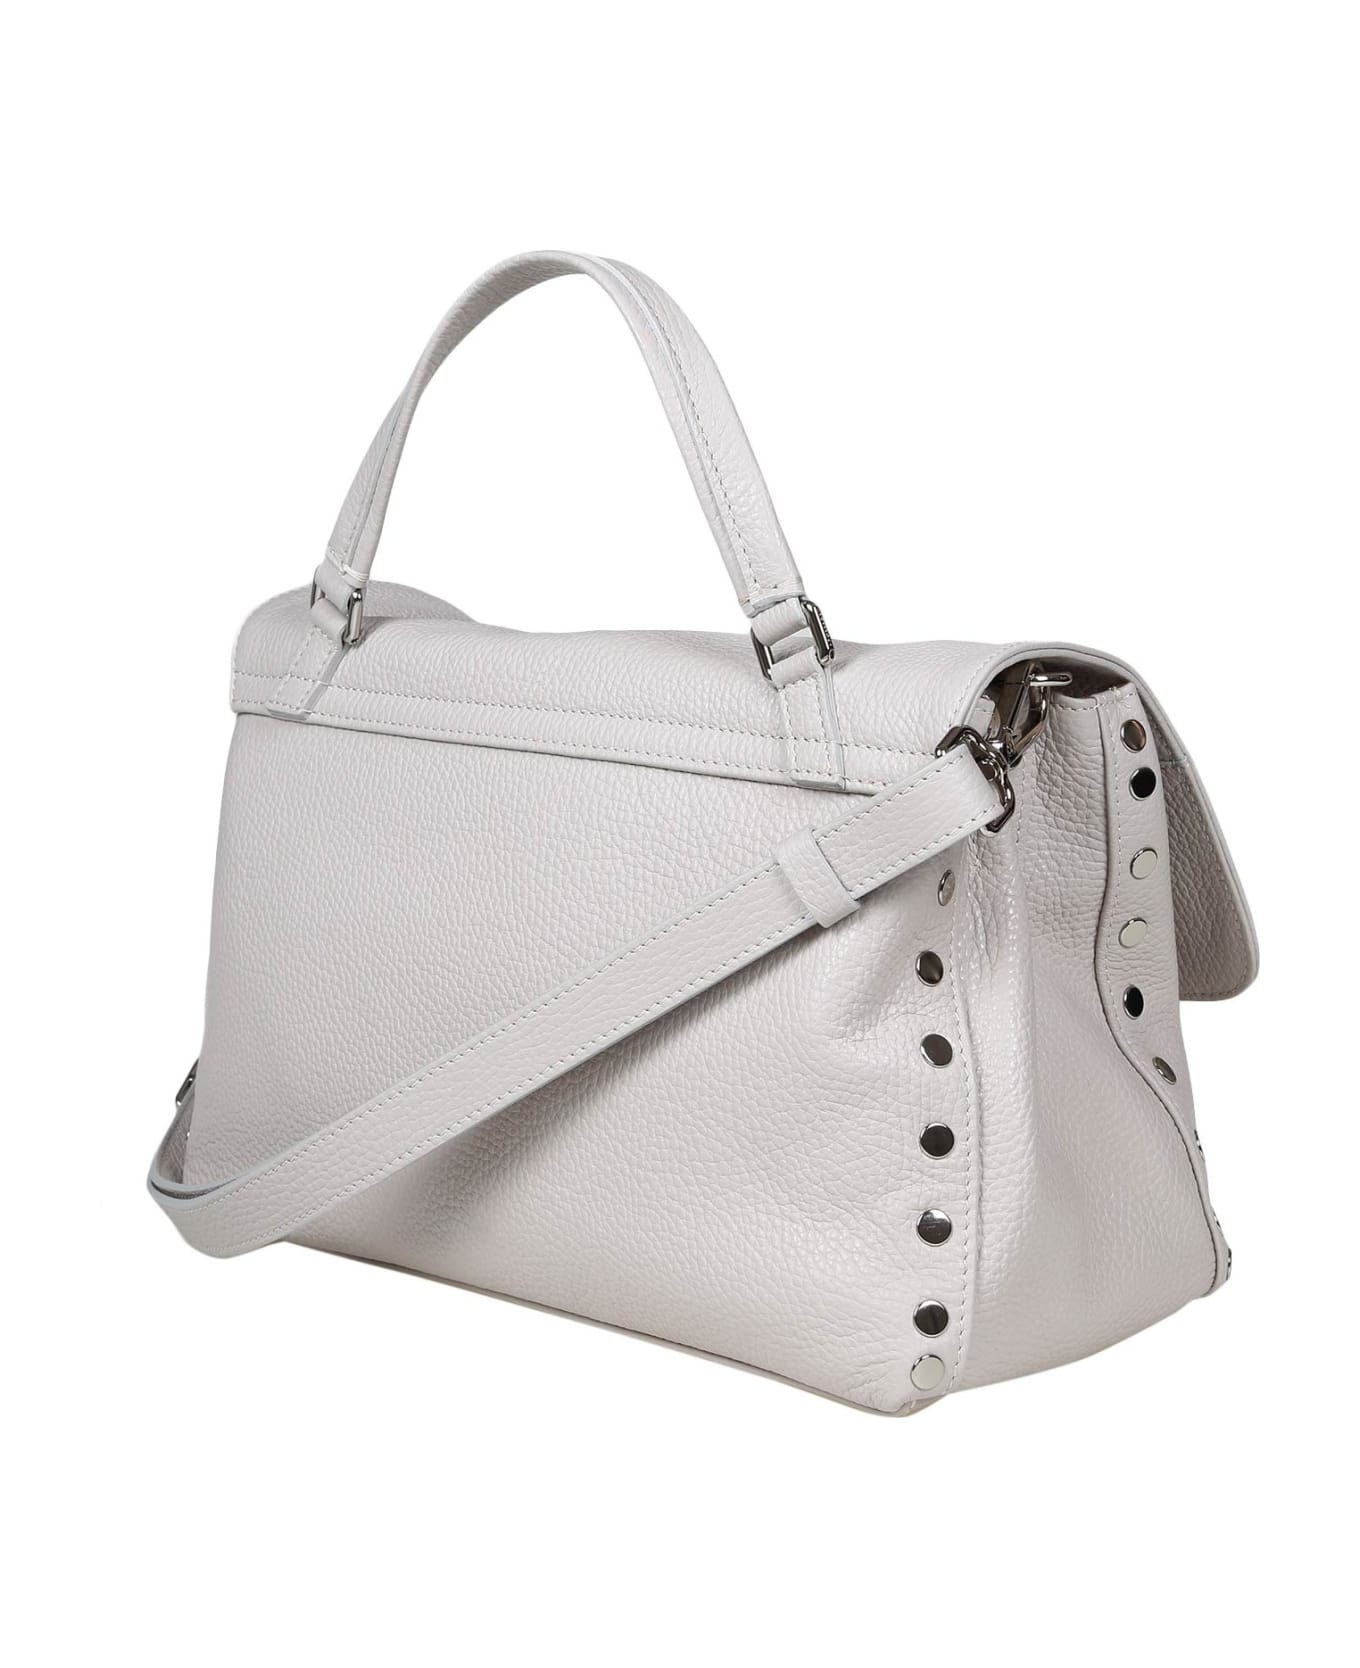 Zanellato Daily Day S In Onyx White Leather - WHITE トートバッグ